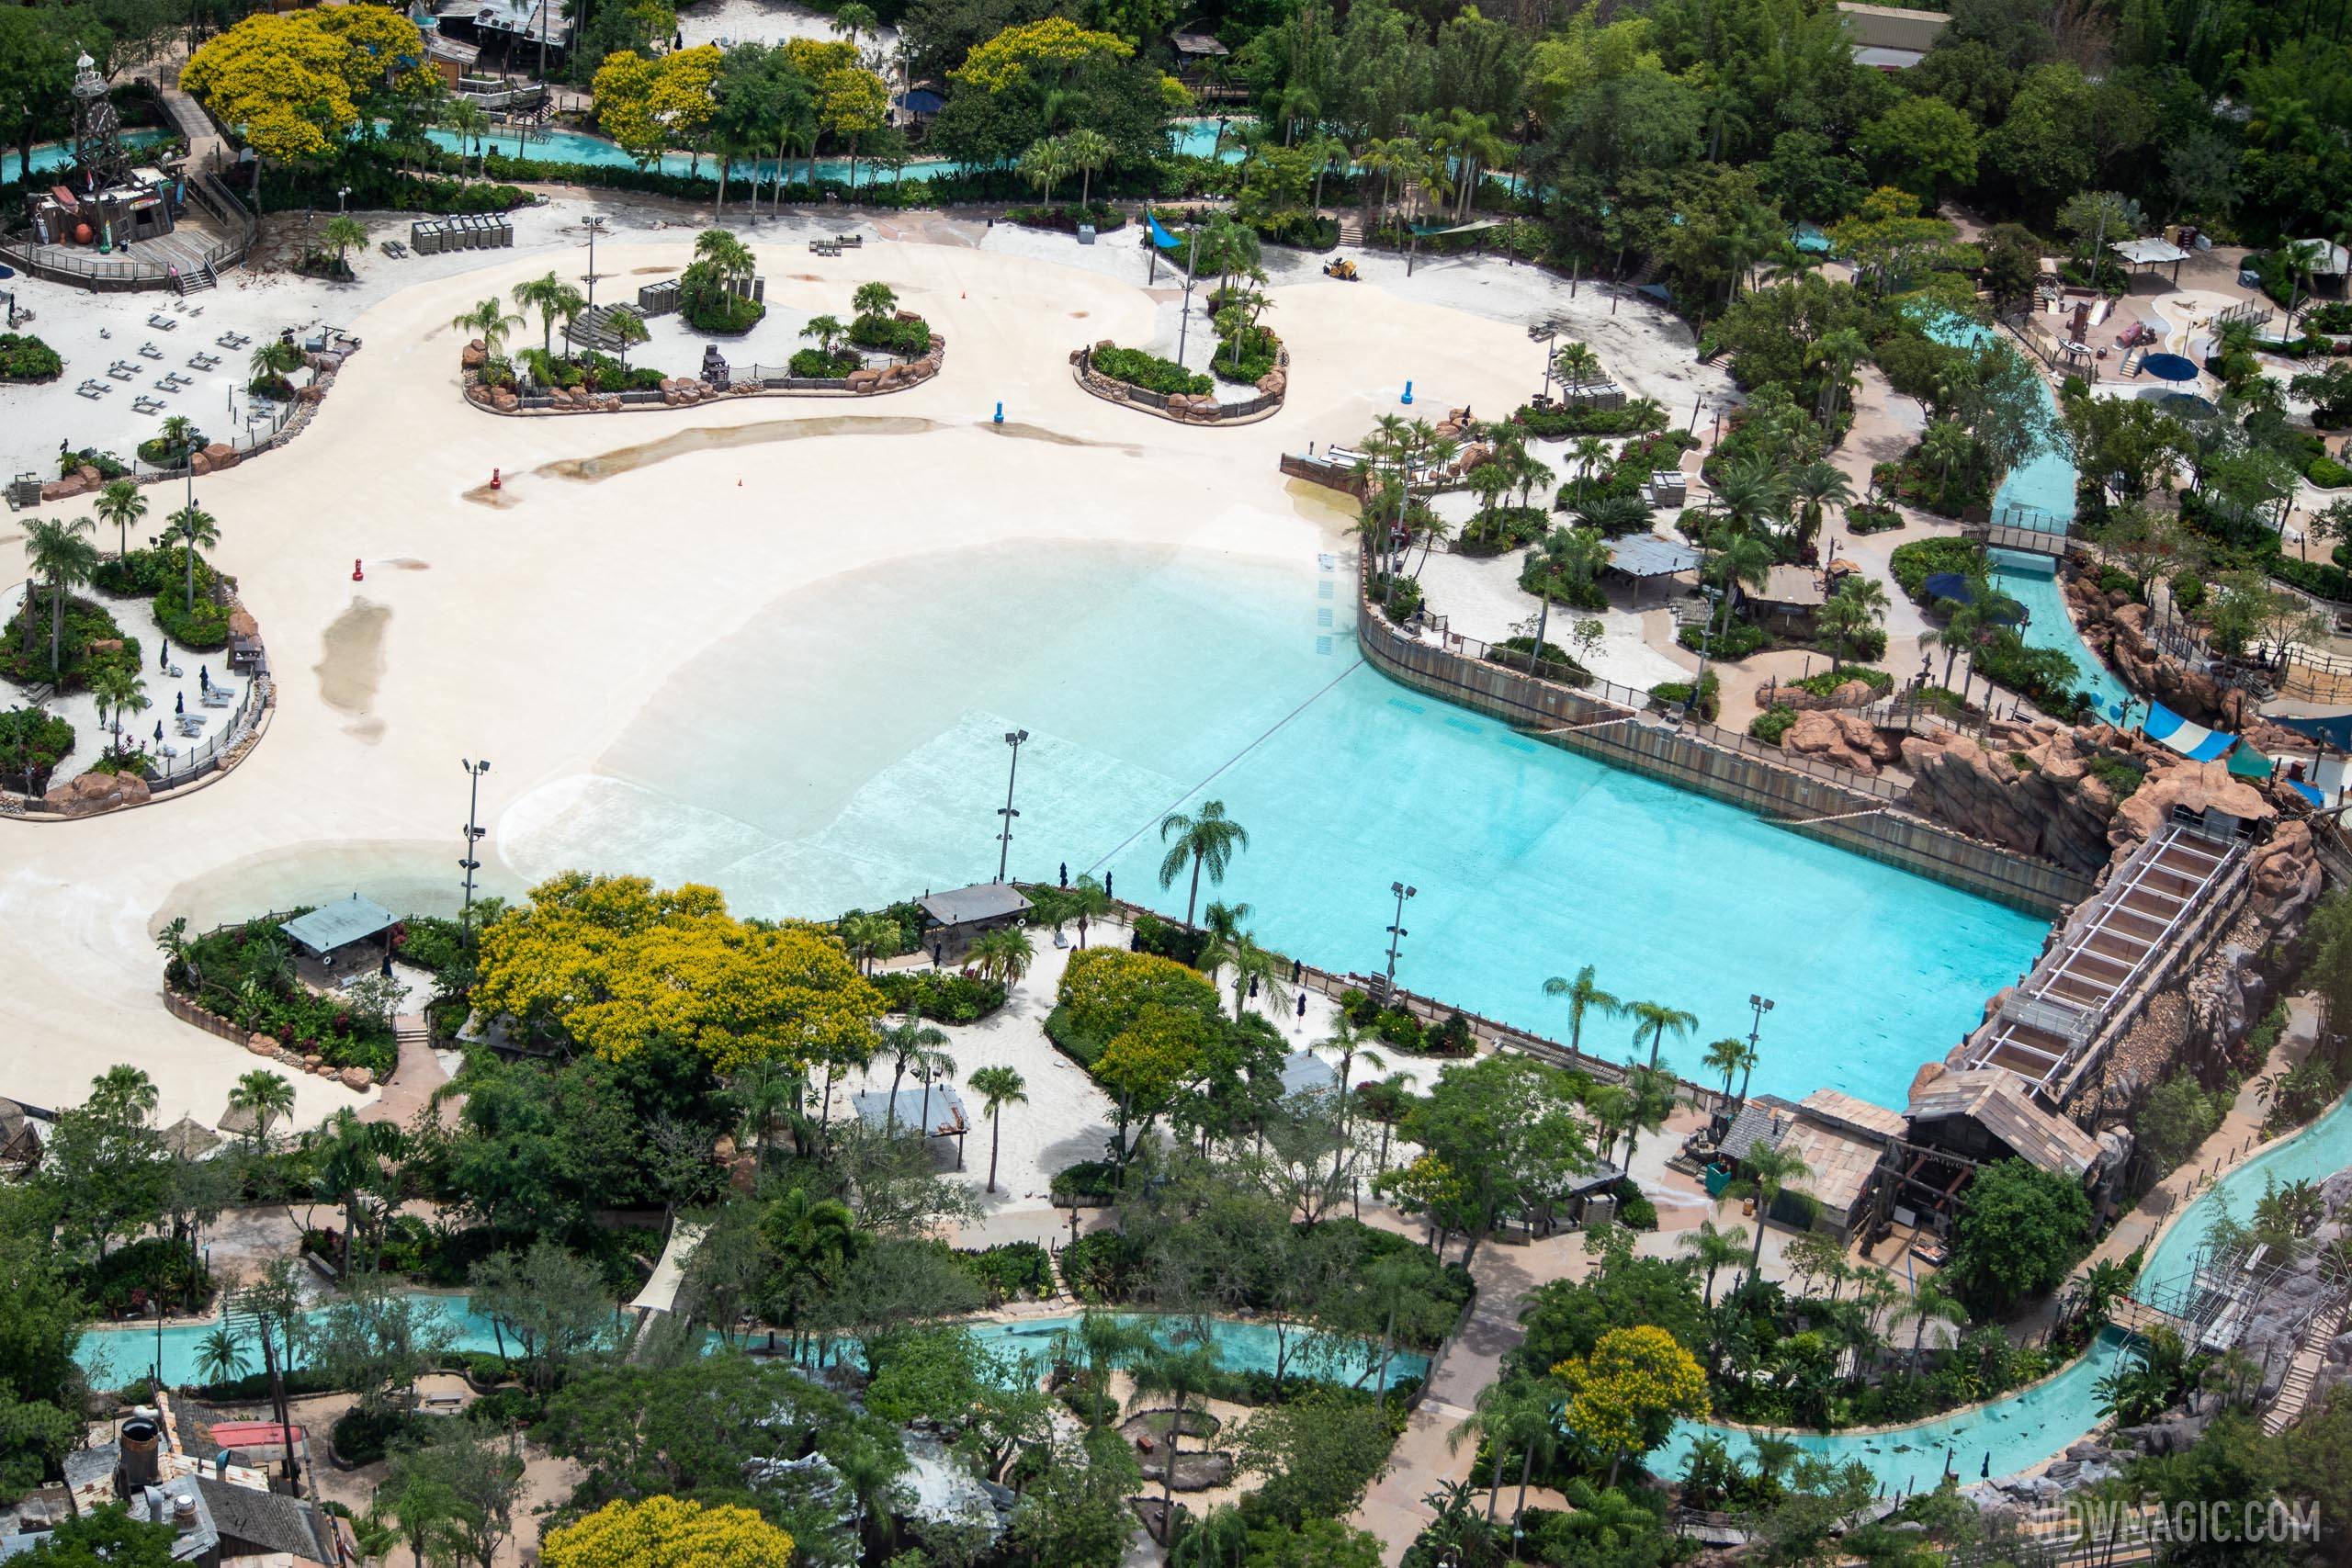 Typhoon Lagoon closed during COVID-19 shutdown and a view of a partially drained wave pool